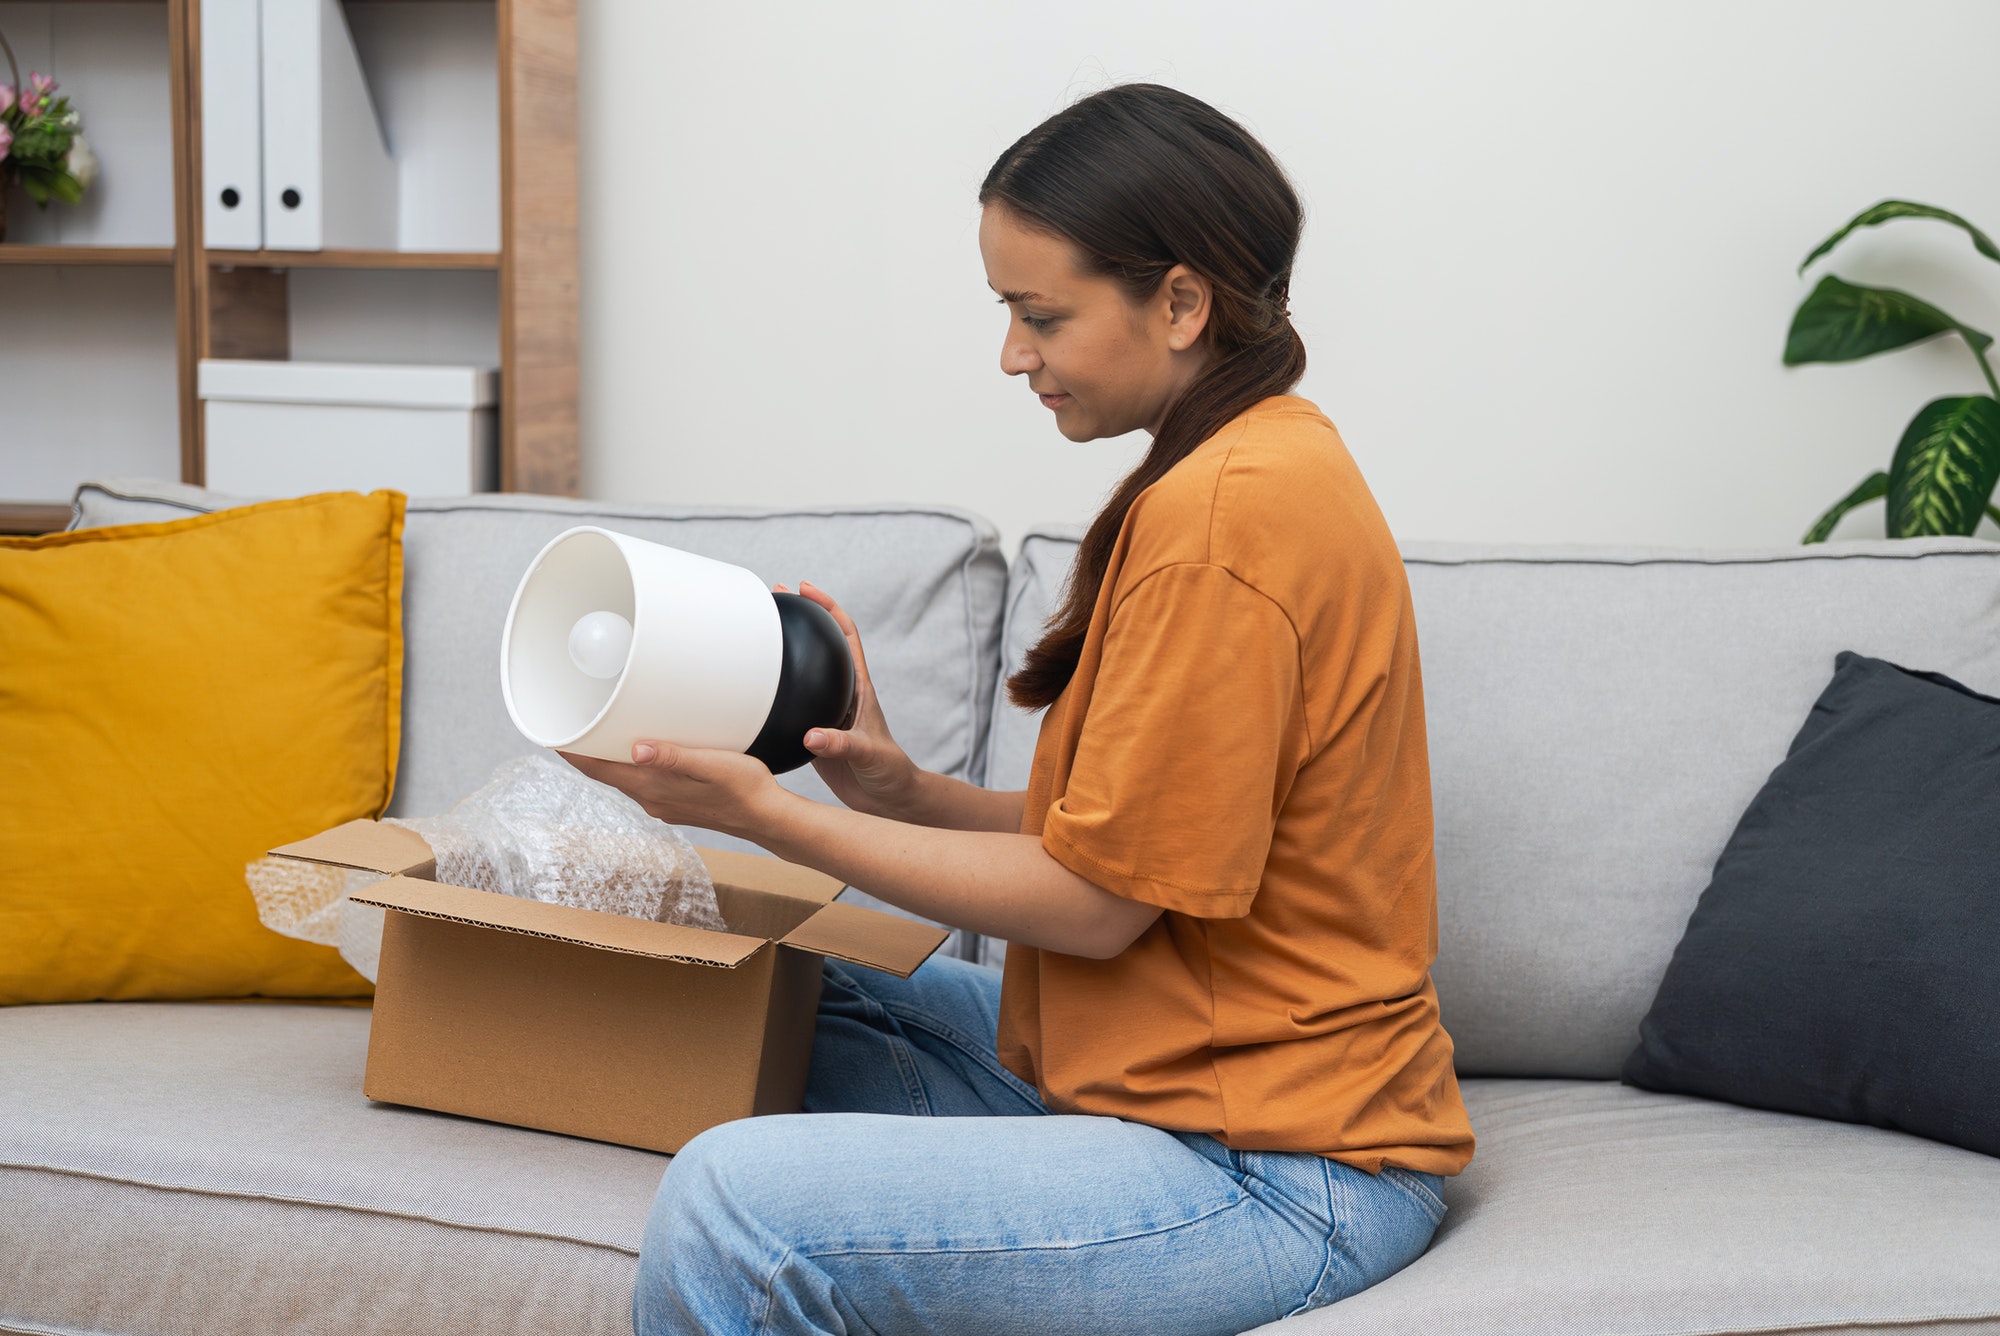 Concentrated lady carefully examines purchased lamp from online furniture store with home delivery